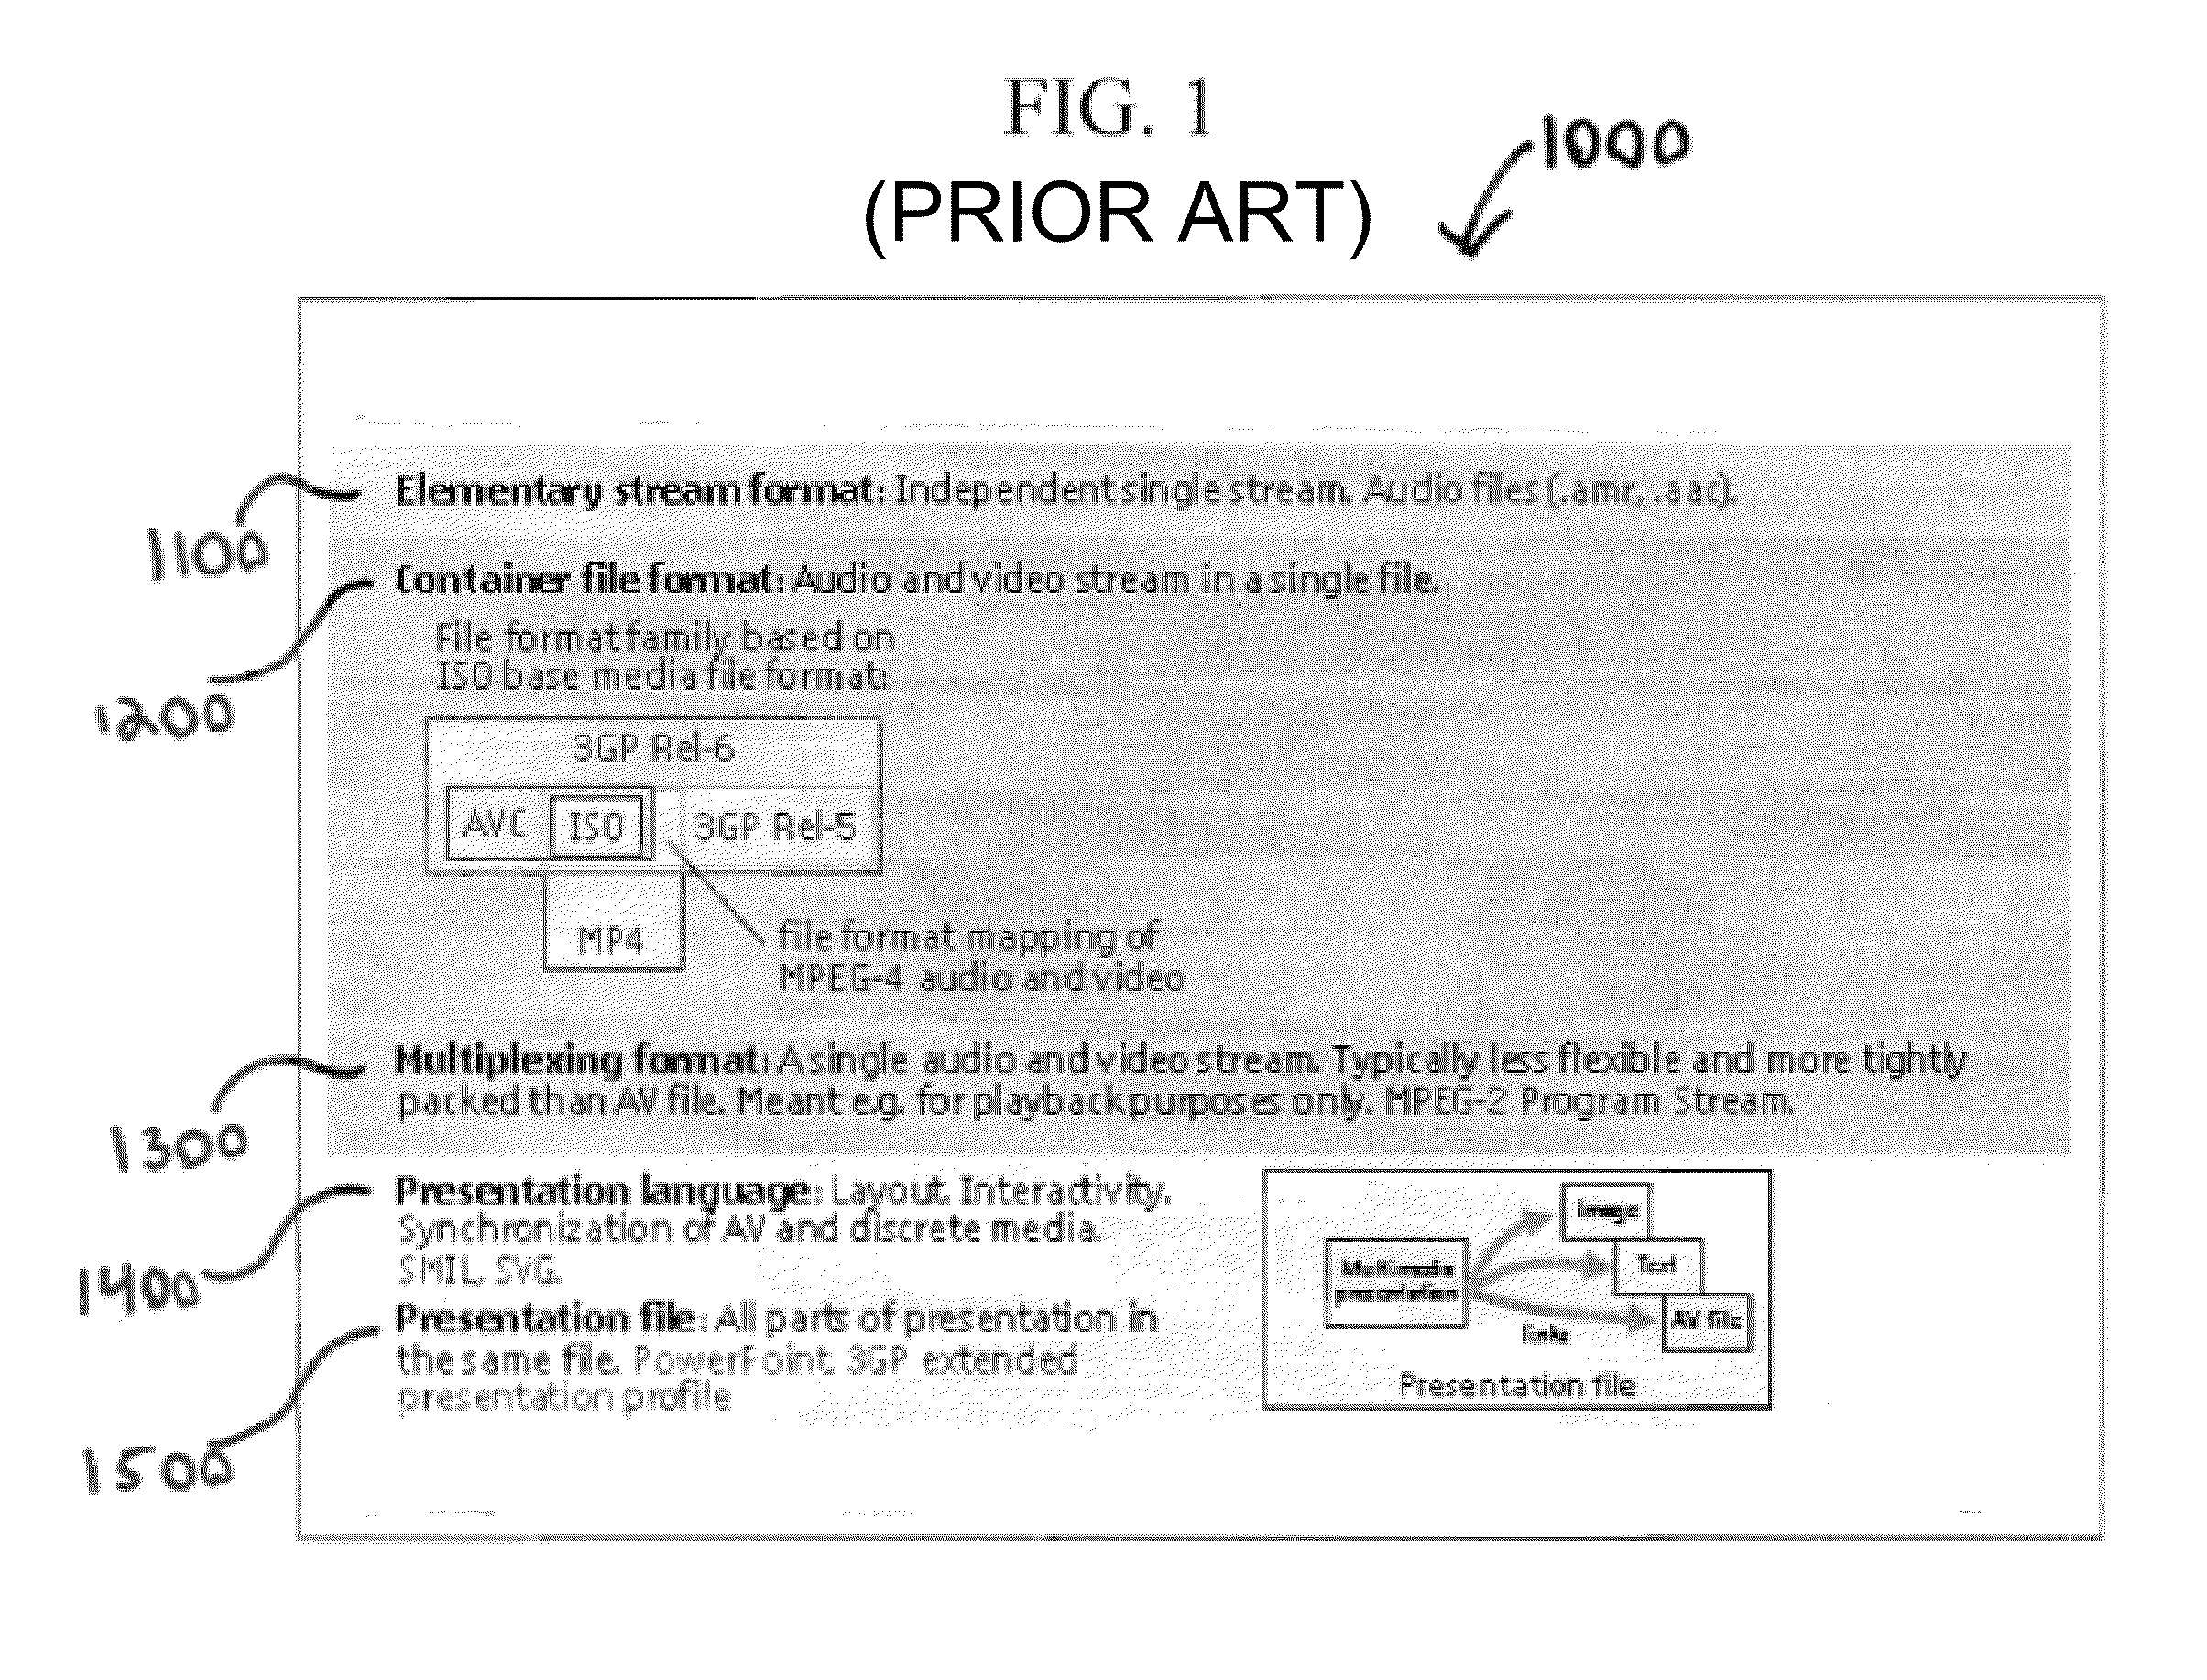 System and method for using multiple meta boxes in the ISO base media file format